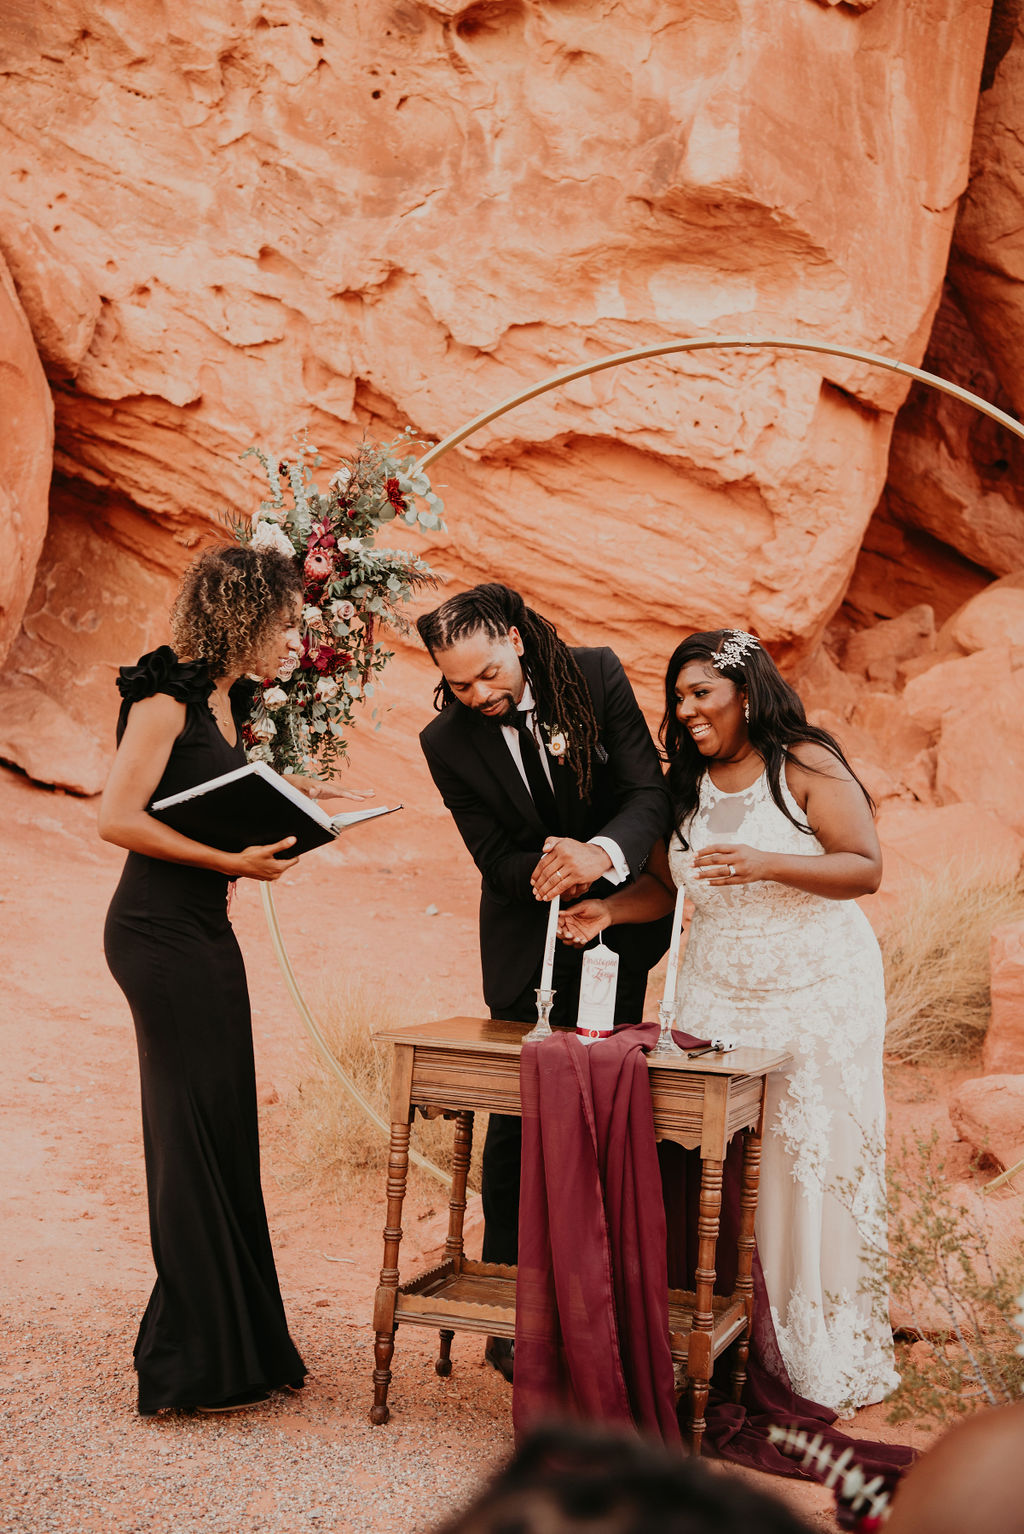 Groom Lighting Unity Candle during Valley of Fire Elopement Ceremony